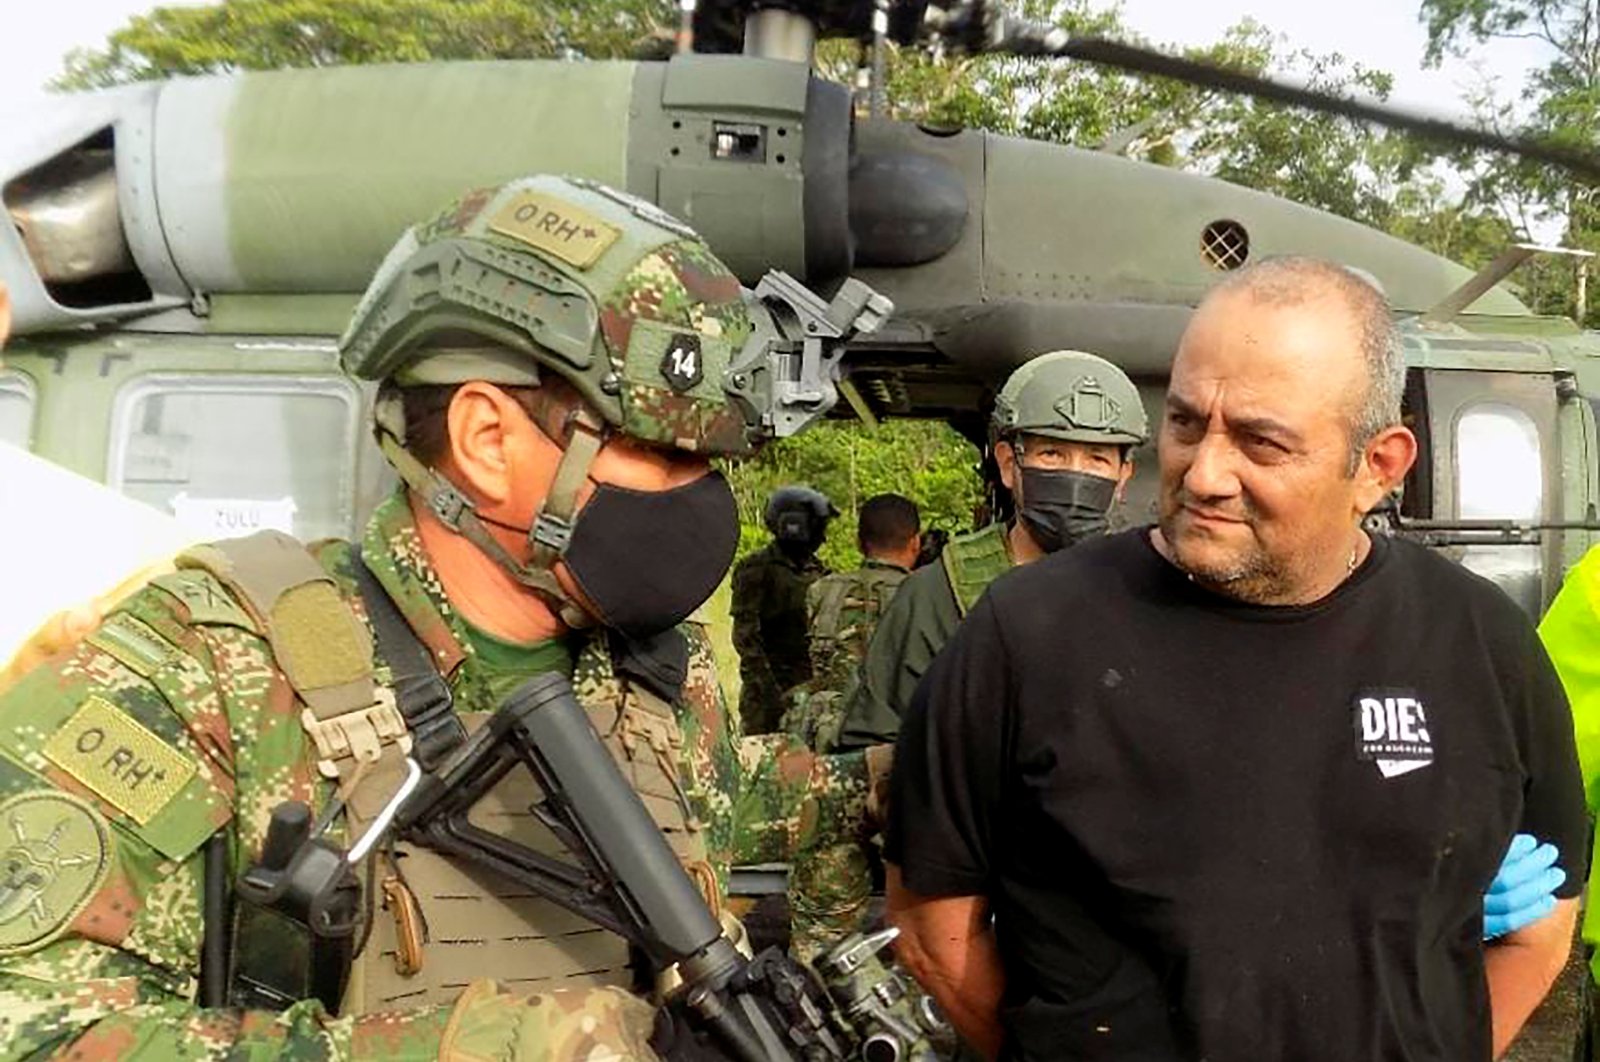 Dairo Antonio Usuga David, known as "Otoniel", is escorted by Colombian military personnel after being captured, in Turbo, Colombia, Oct. 23, 2021. (Colombian Defense Ministry via Reuters)